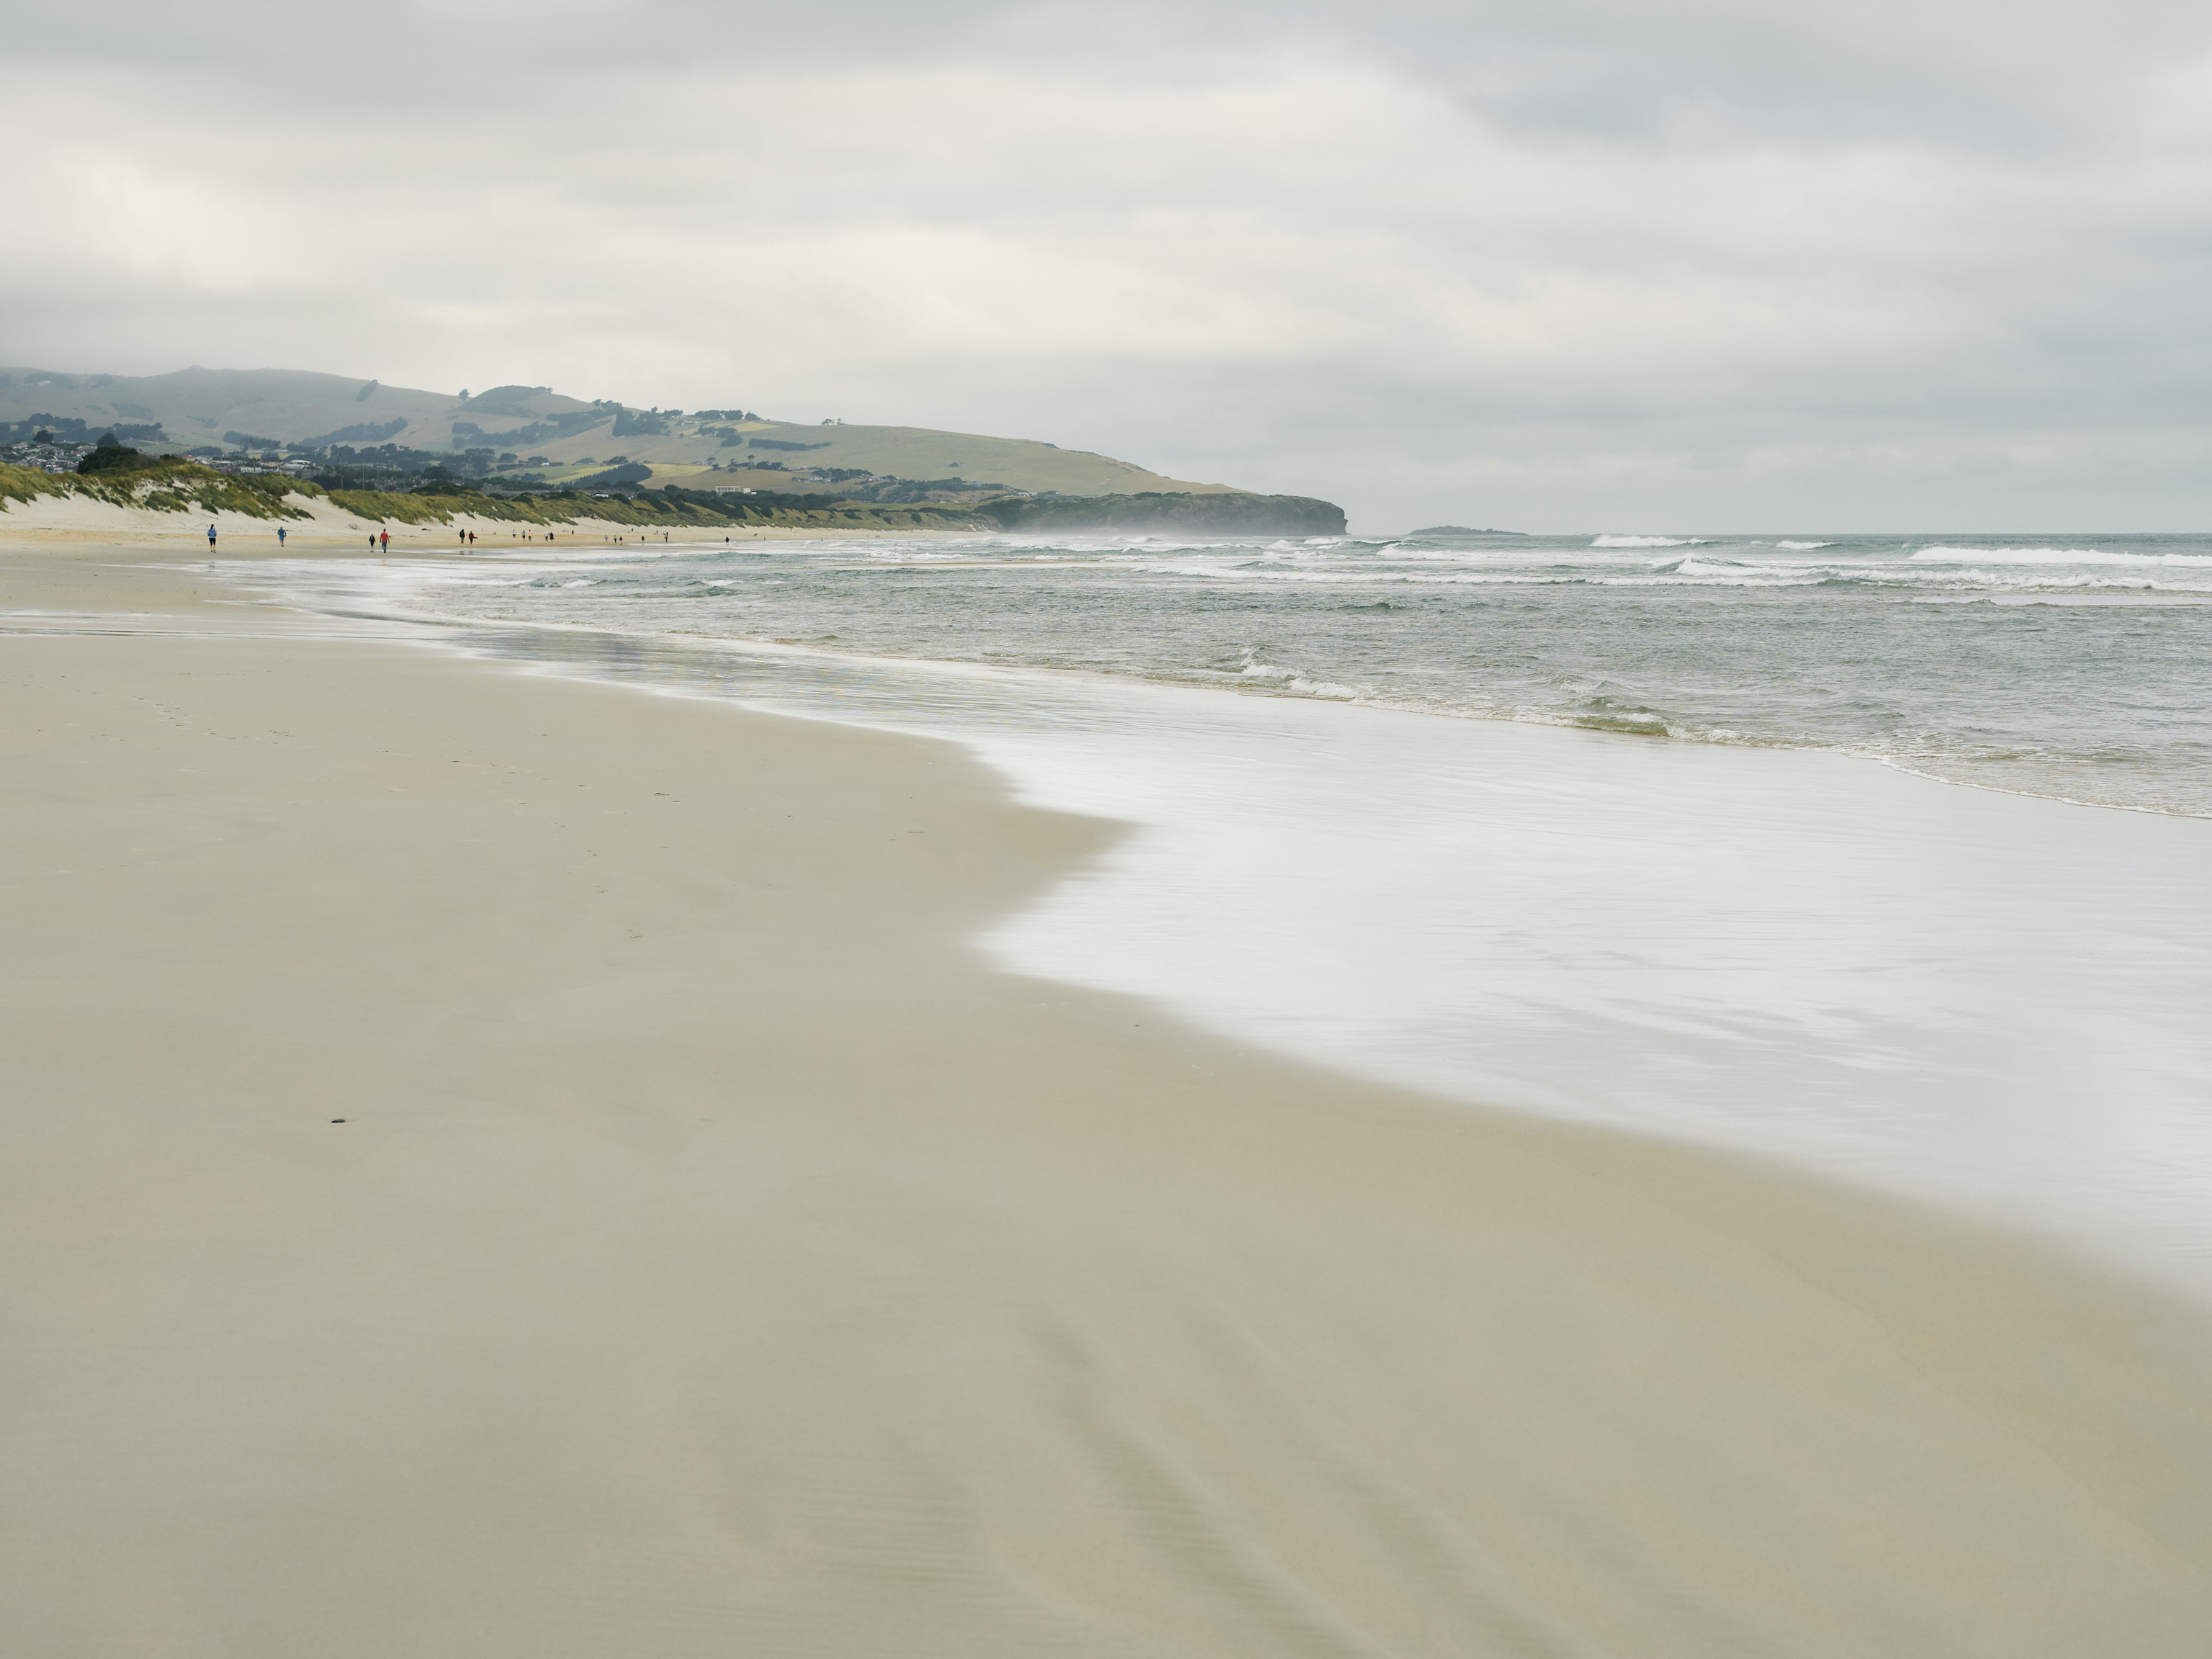 View of a beautiful sandy beach, the ocean waves gently crashing against the shore.